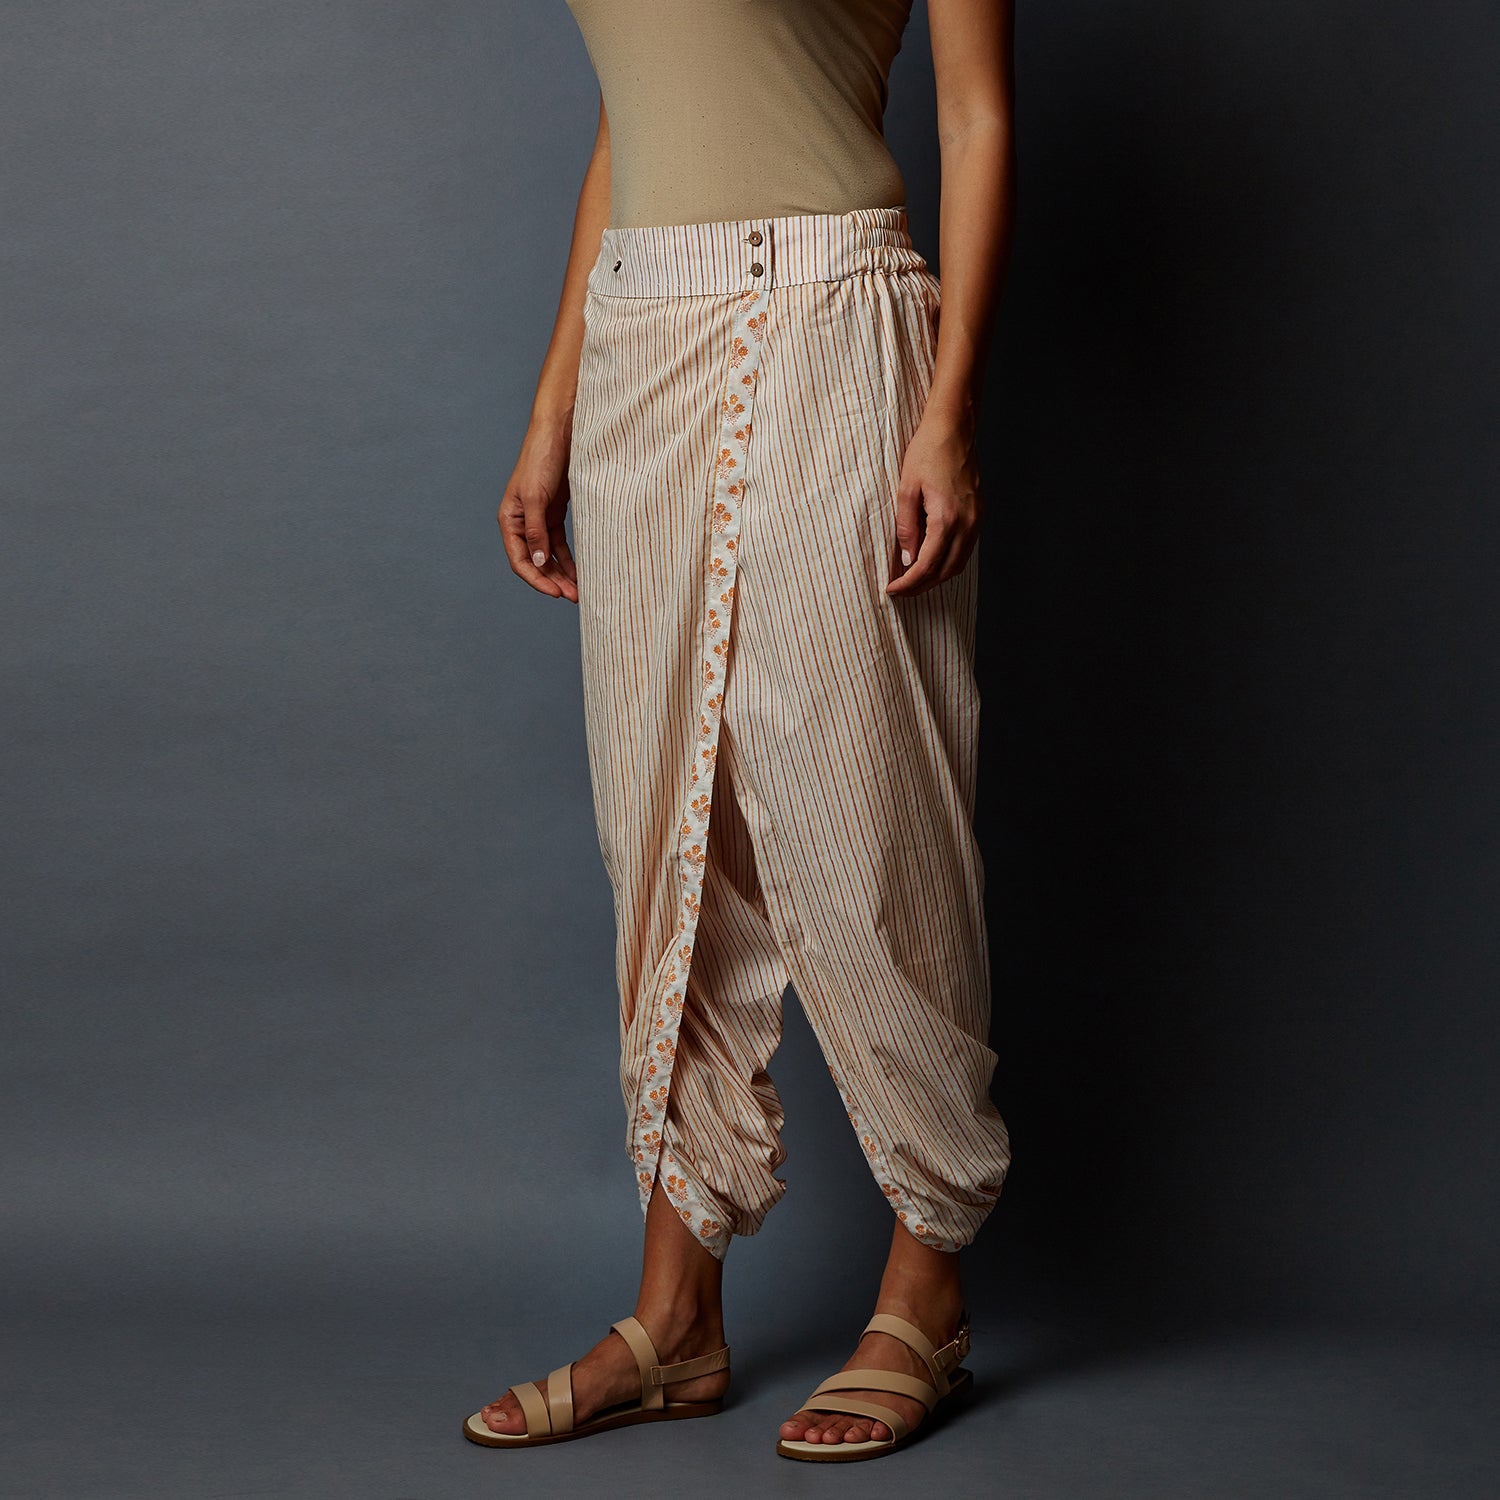 Polyester Blended Plain Ladies Dhoti Pants at Rs 140/piece in Coimbatore |  ID: 23042852697